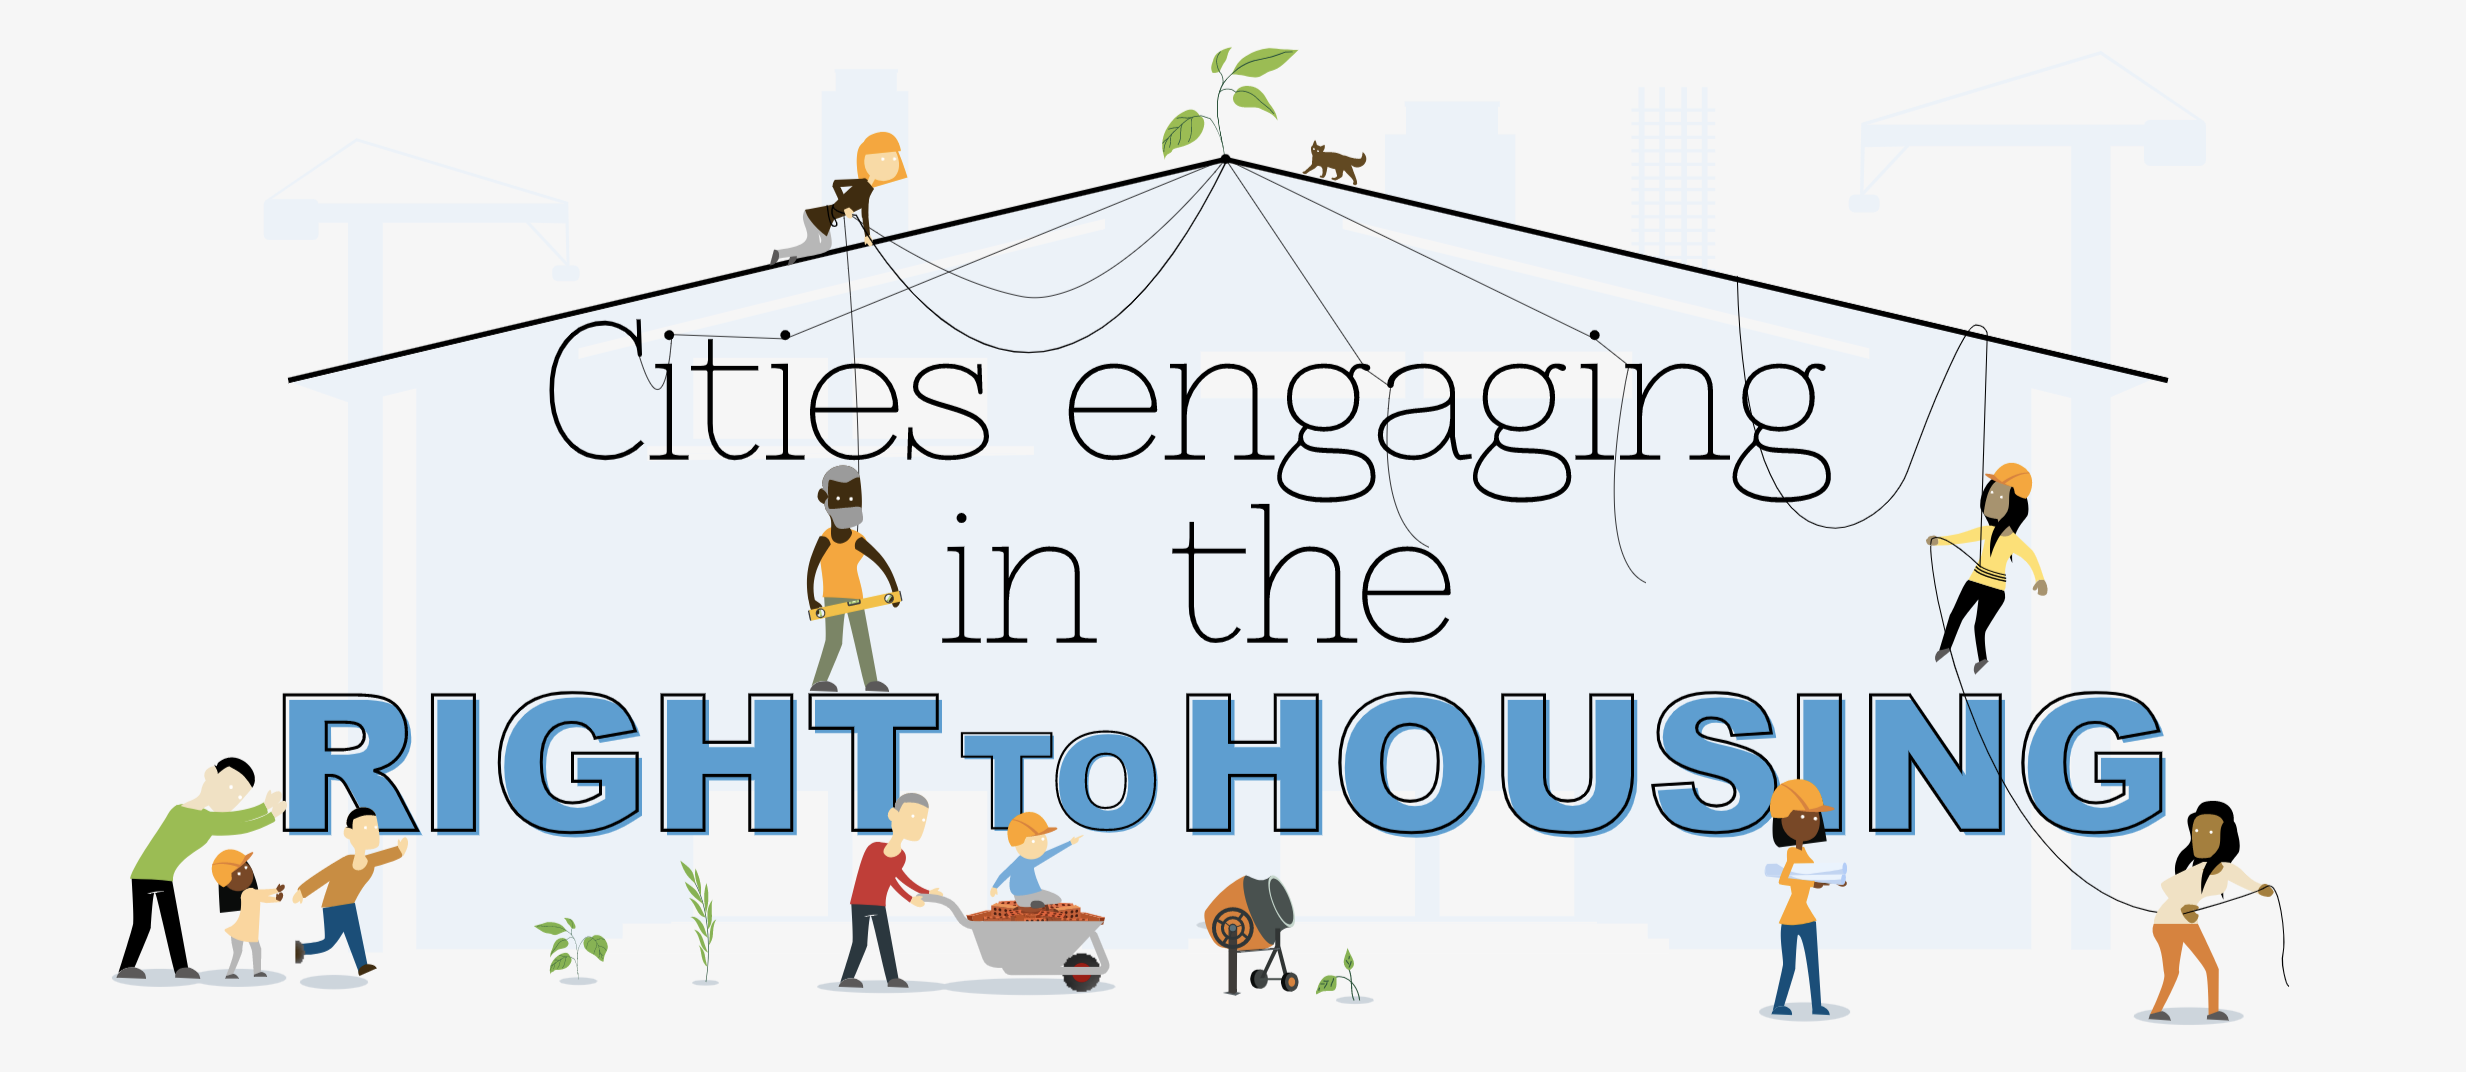 Cities engaging in the RIGHT to HOUSING